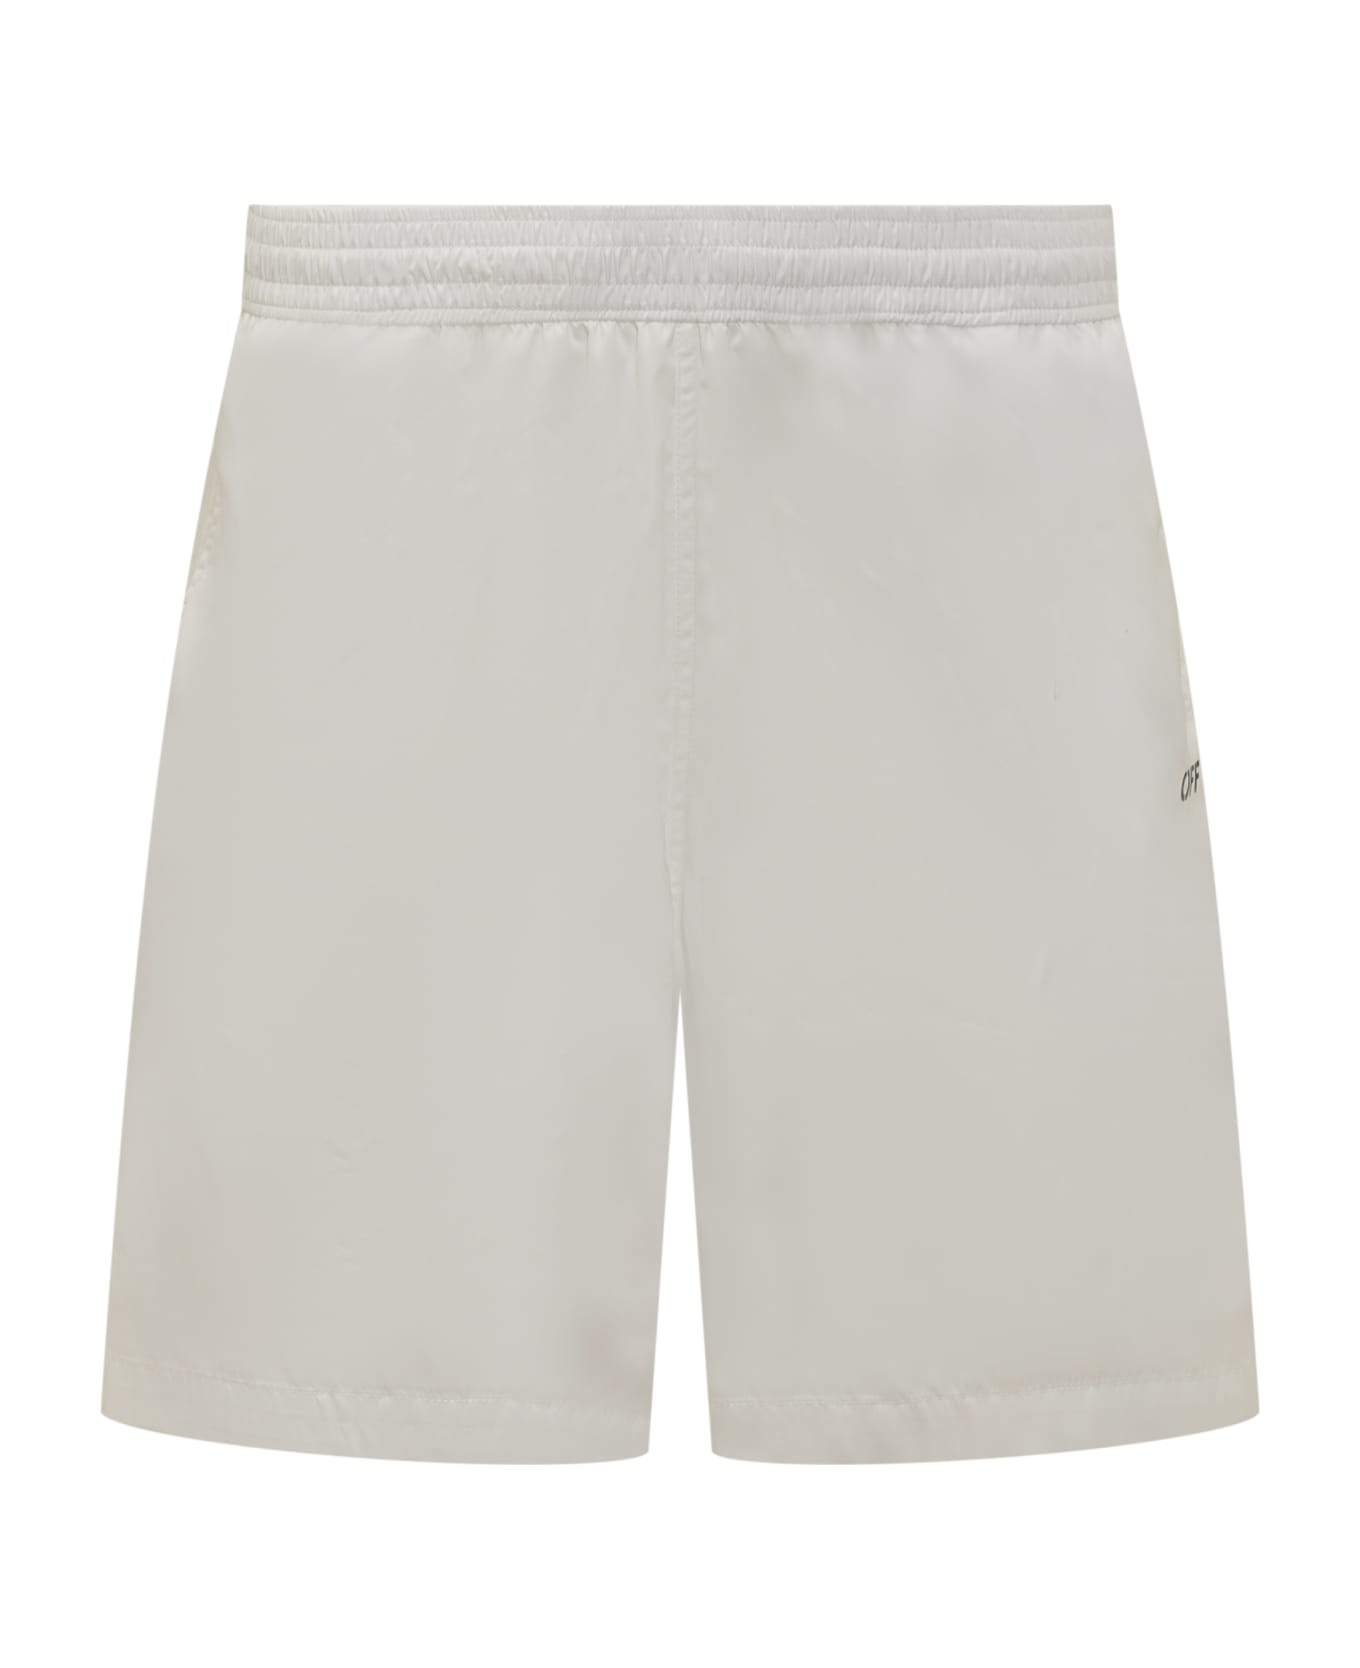 Off-White Swimshorts With Scribble Motif - WHITE BLACK